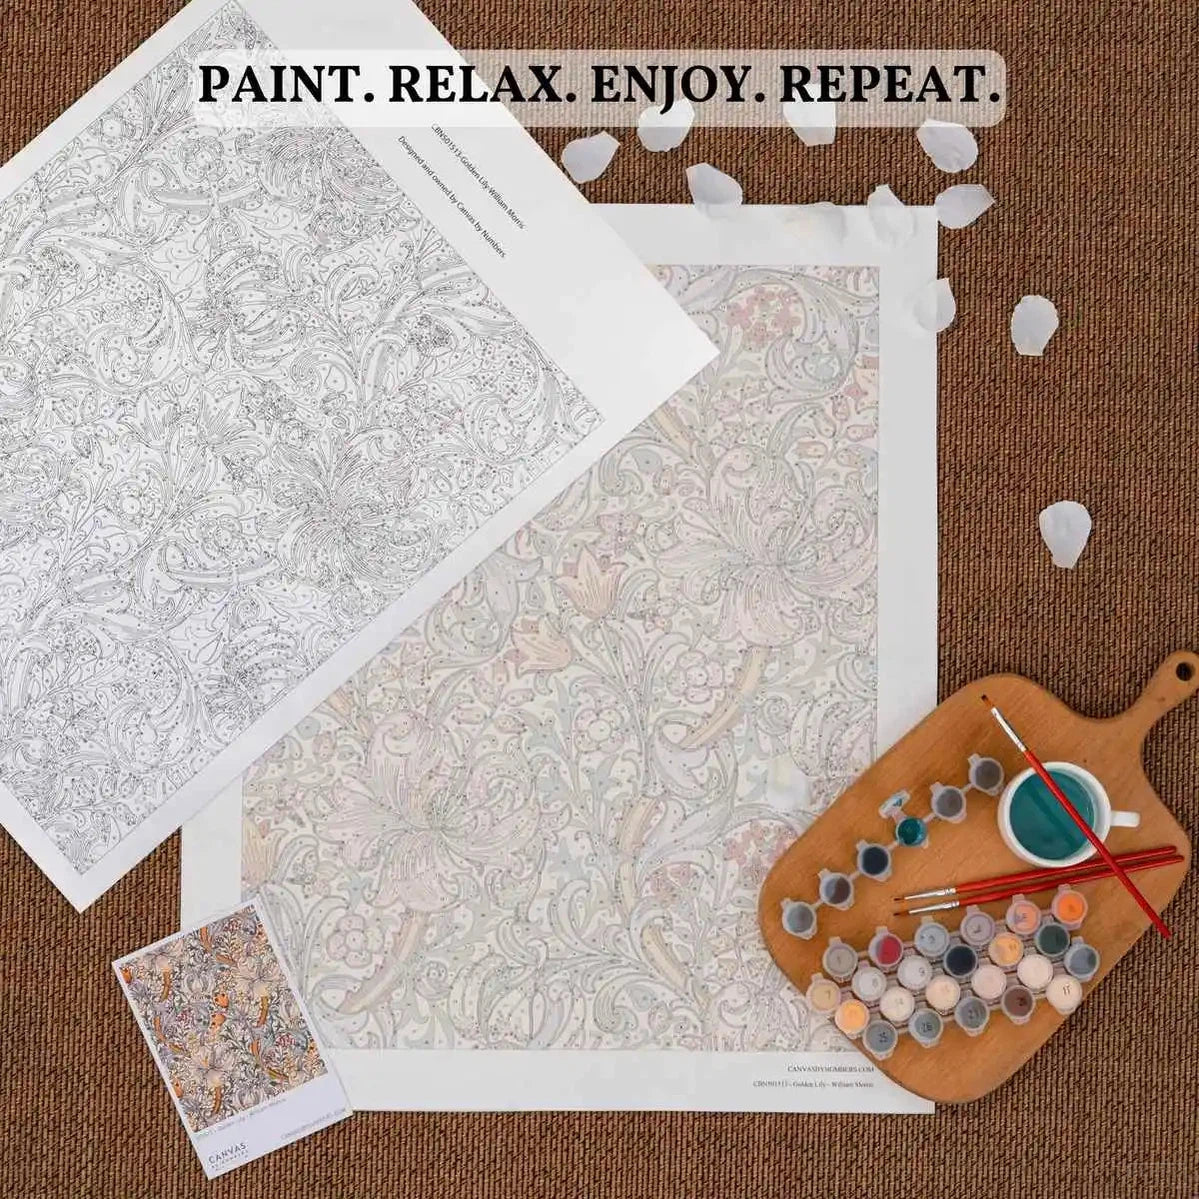 Bed of Flowers - Paint by Numbers-Bed of Flowers is a floral paint by numbers kit full of of details and shades for the avid painter. We are rated Excellent in Trustpilot. Get yours today!-Canvas by Numbers